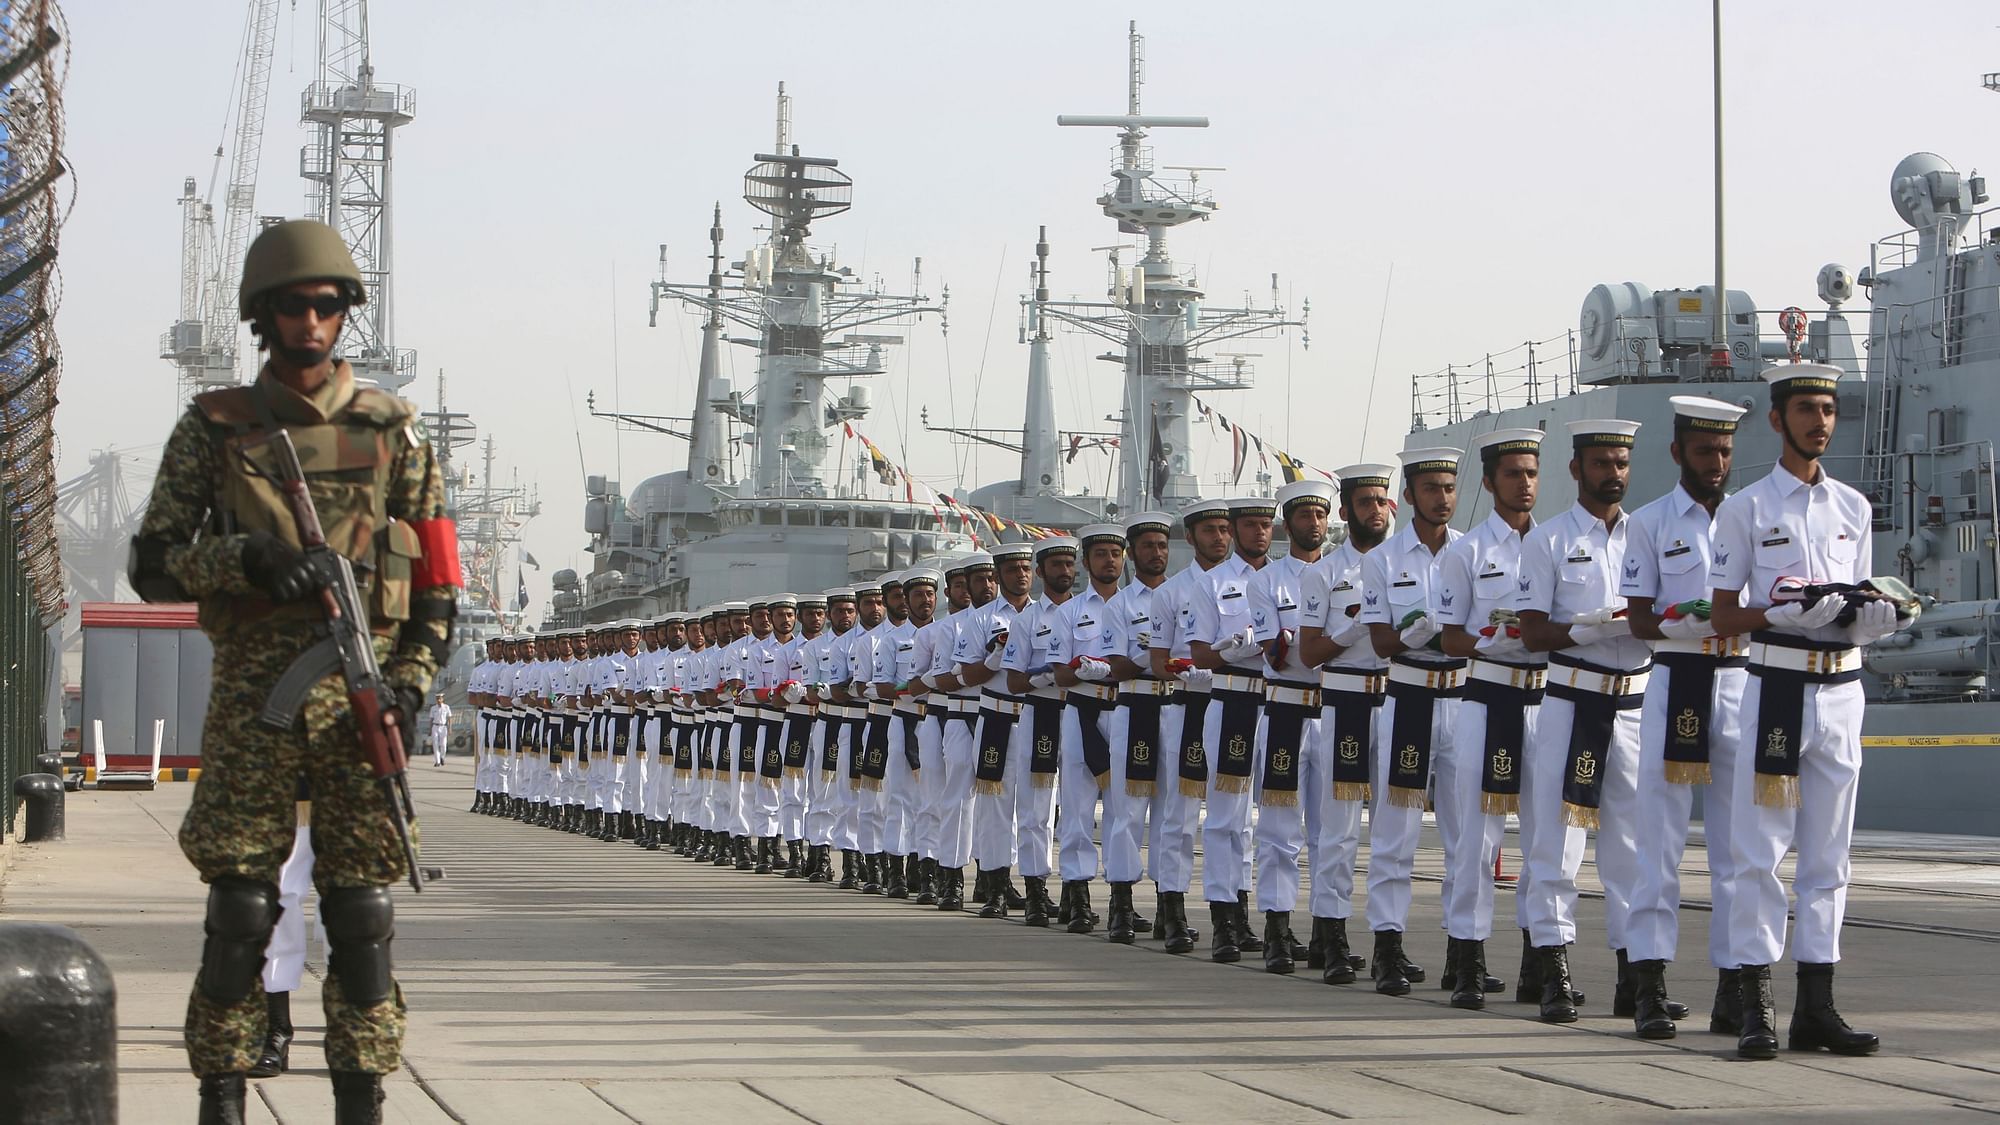 Pakistan Naval personal carry national flags of participating countries during the opening ceremony of Pakistan Navy’s Multinational Exercise AMAN-19, in Karachi, Pakistan.